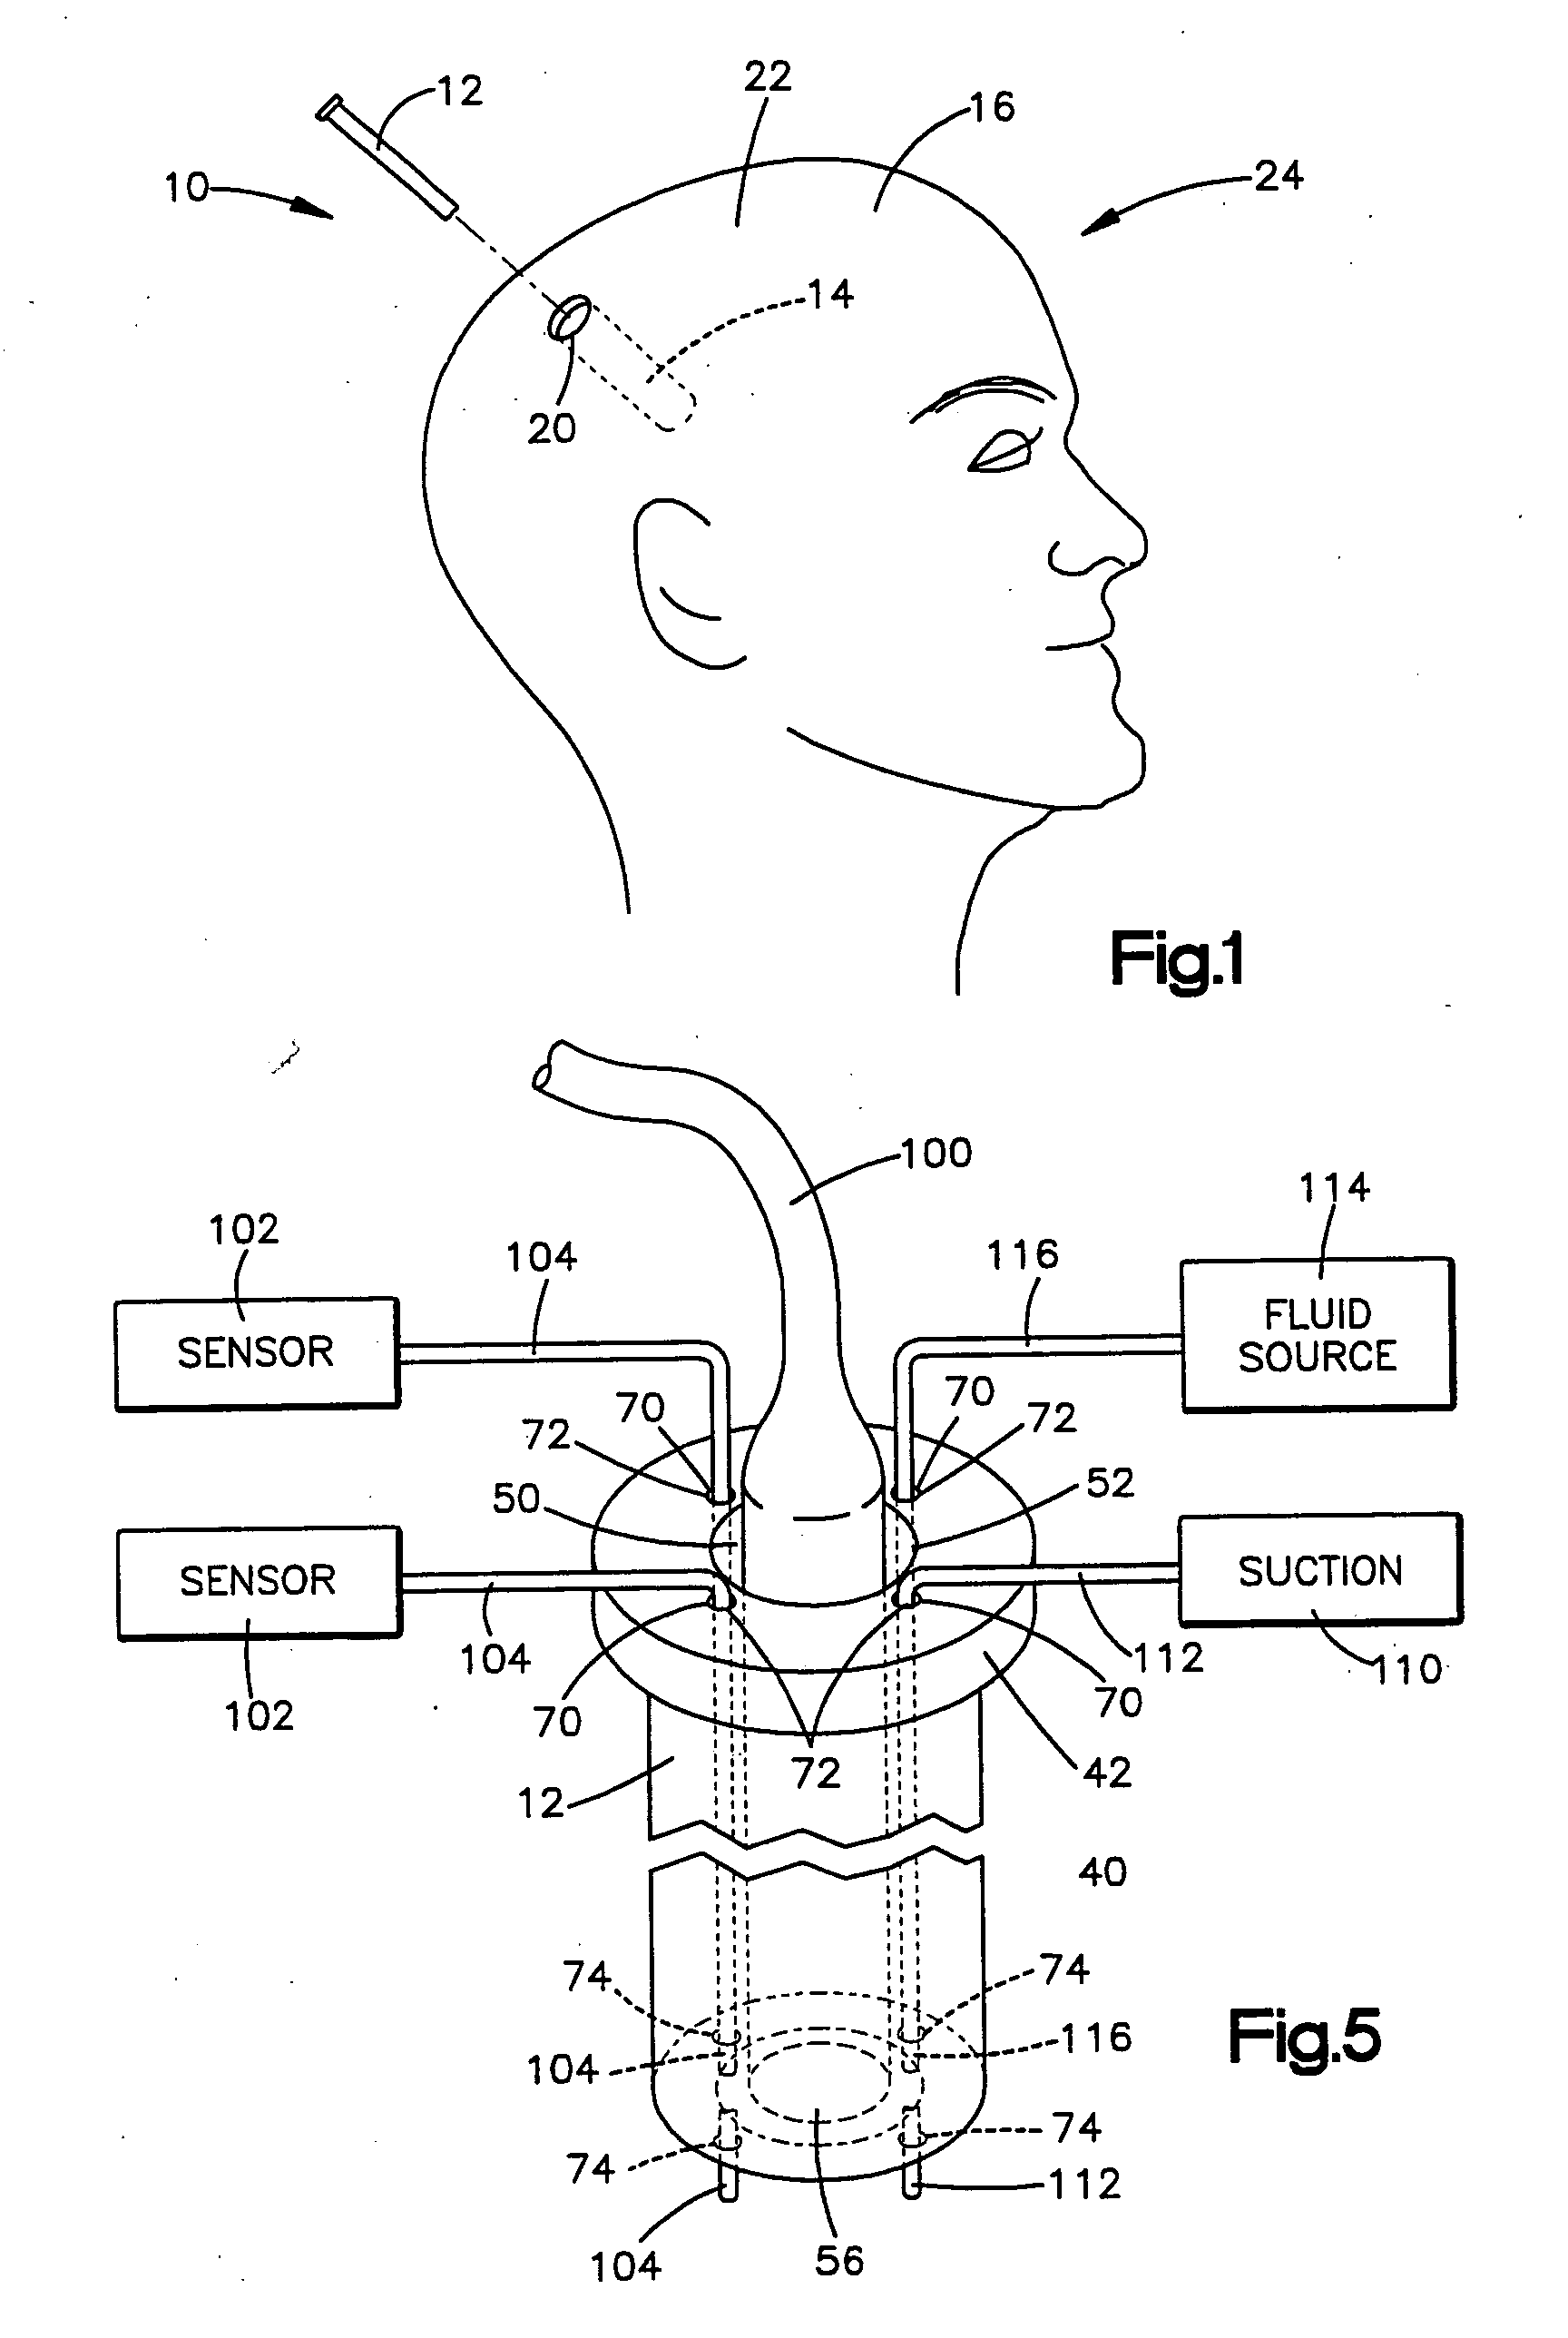 Apparatus for facilitating delivery of at least one device to a target site in a body